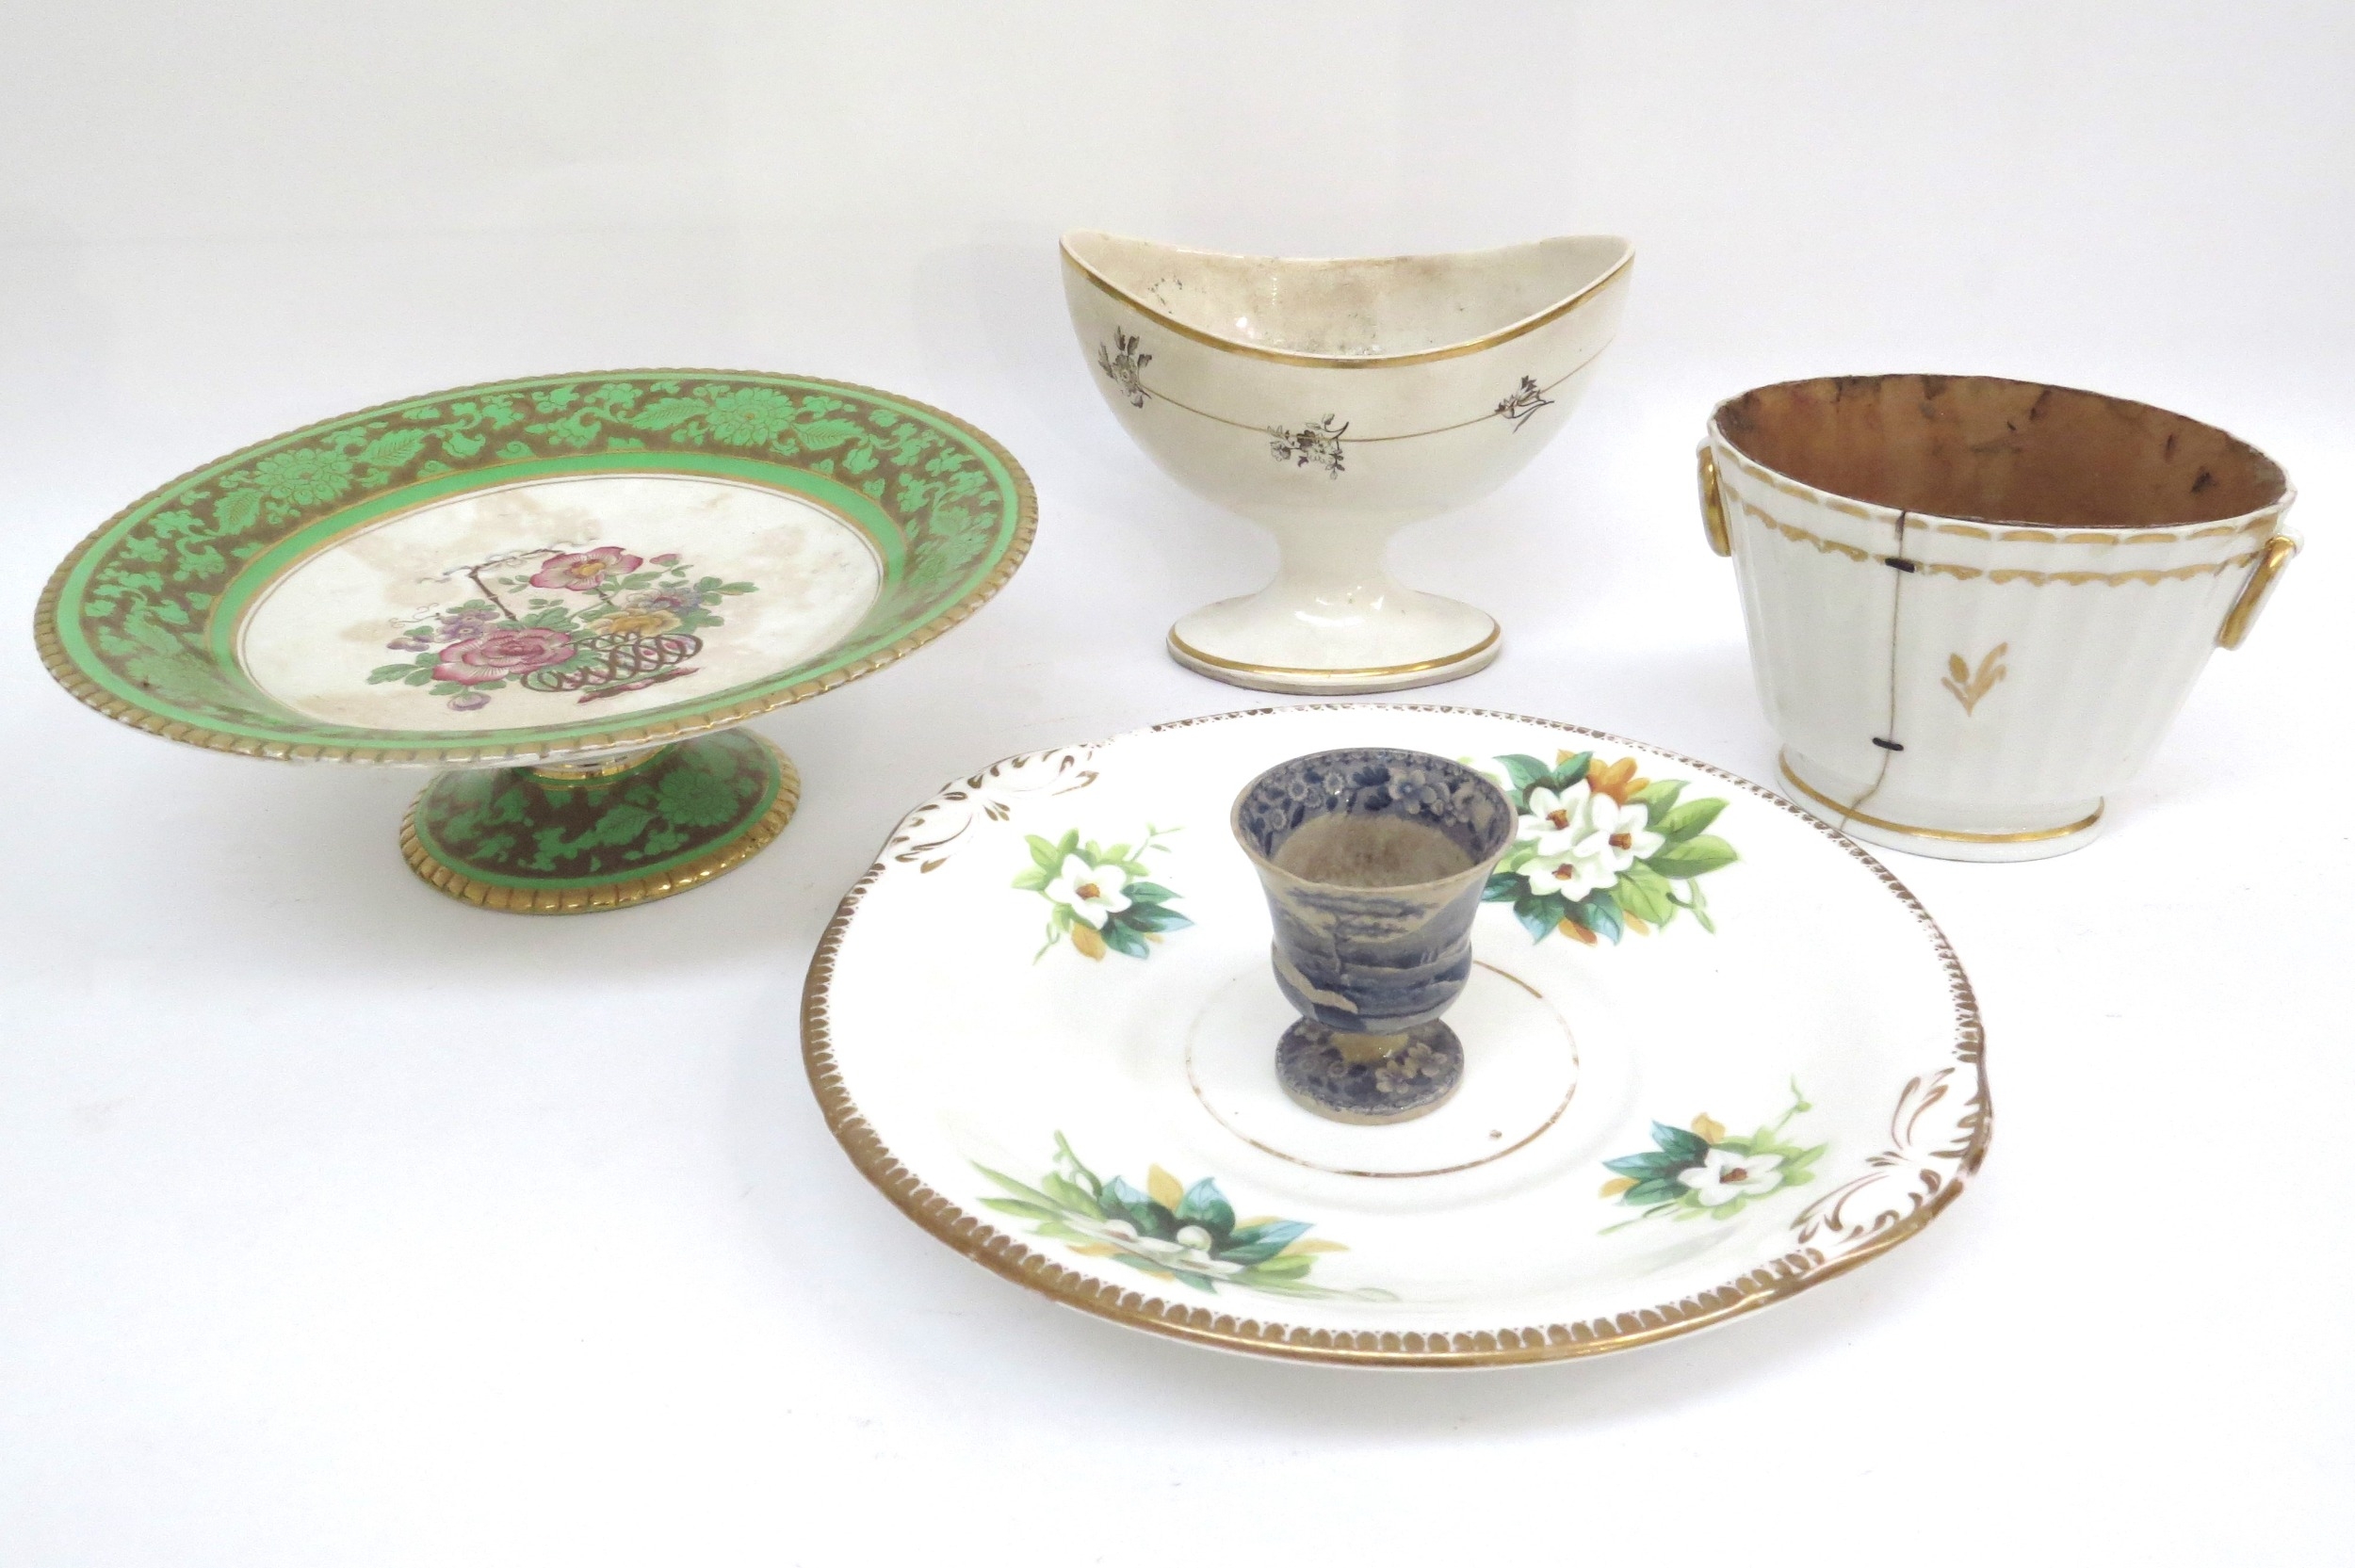 Mixed 19th Century ceramics including staple repaired Derby pot, teacups and saucers, Spode egg cup, - Image 3 of 7